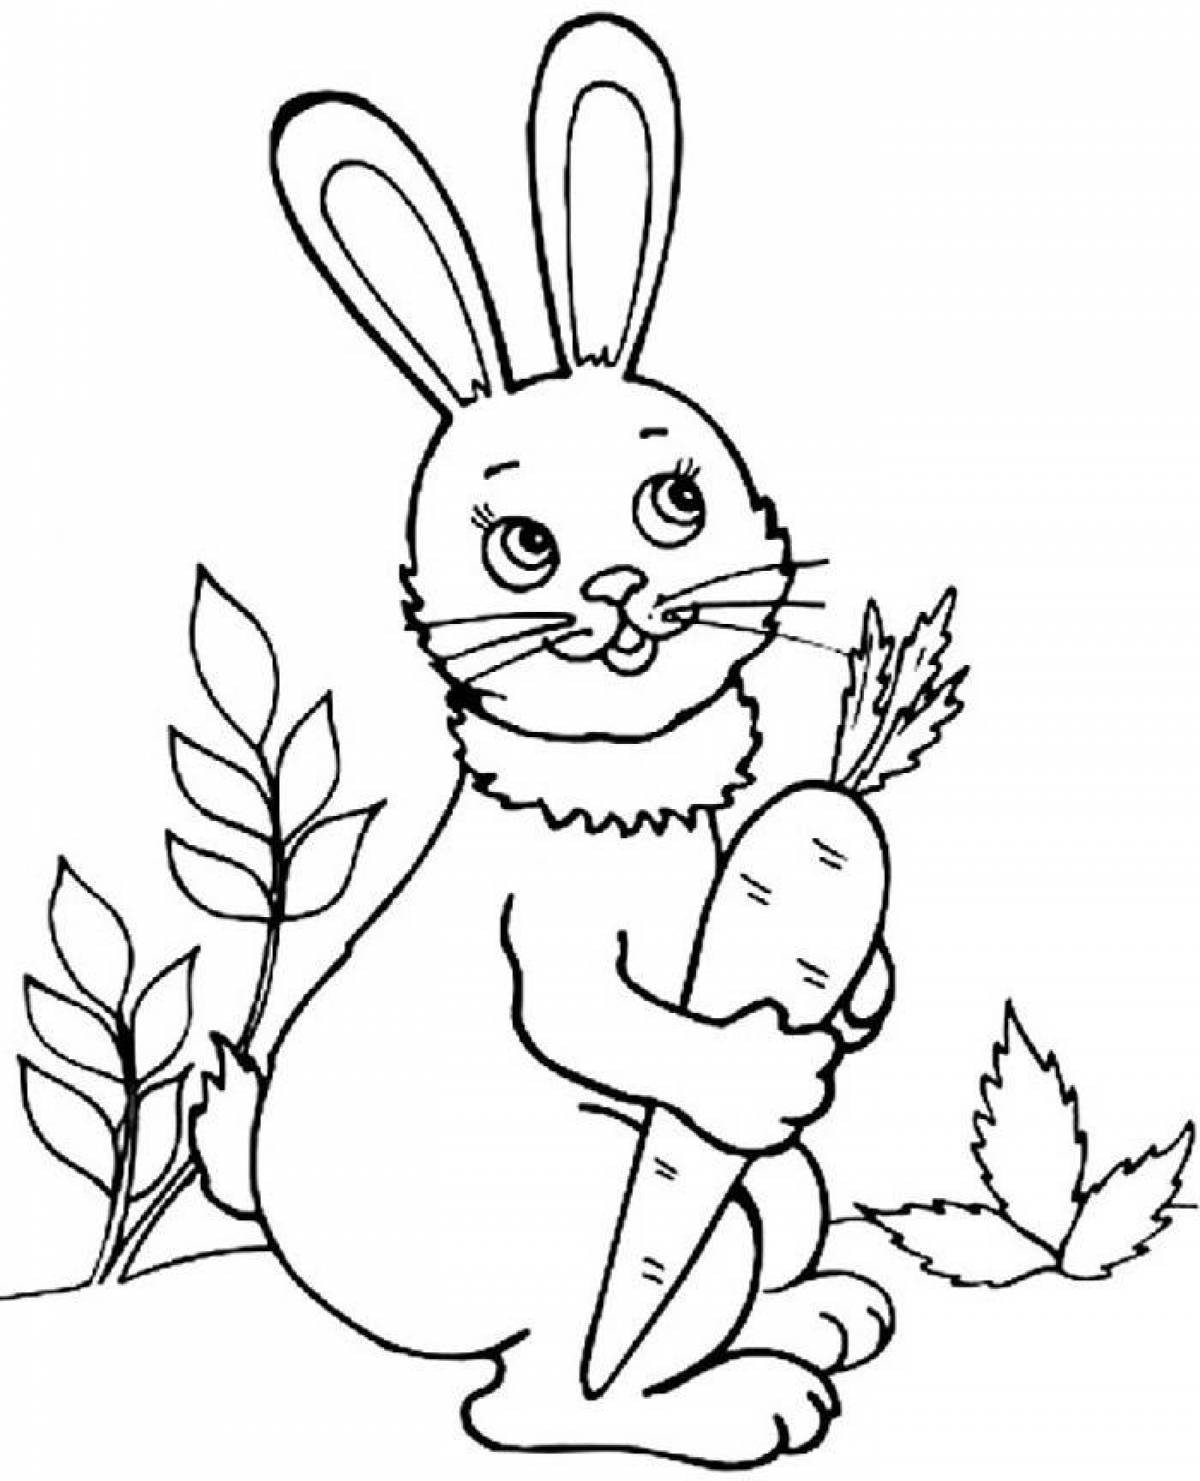 Violent hare coloring picture for kids